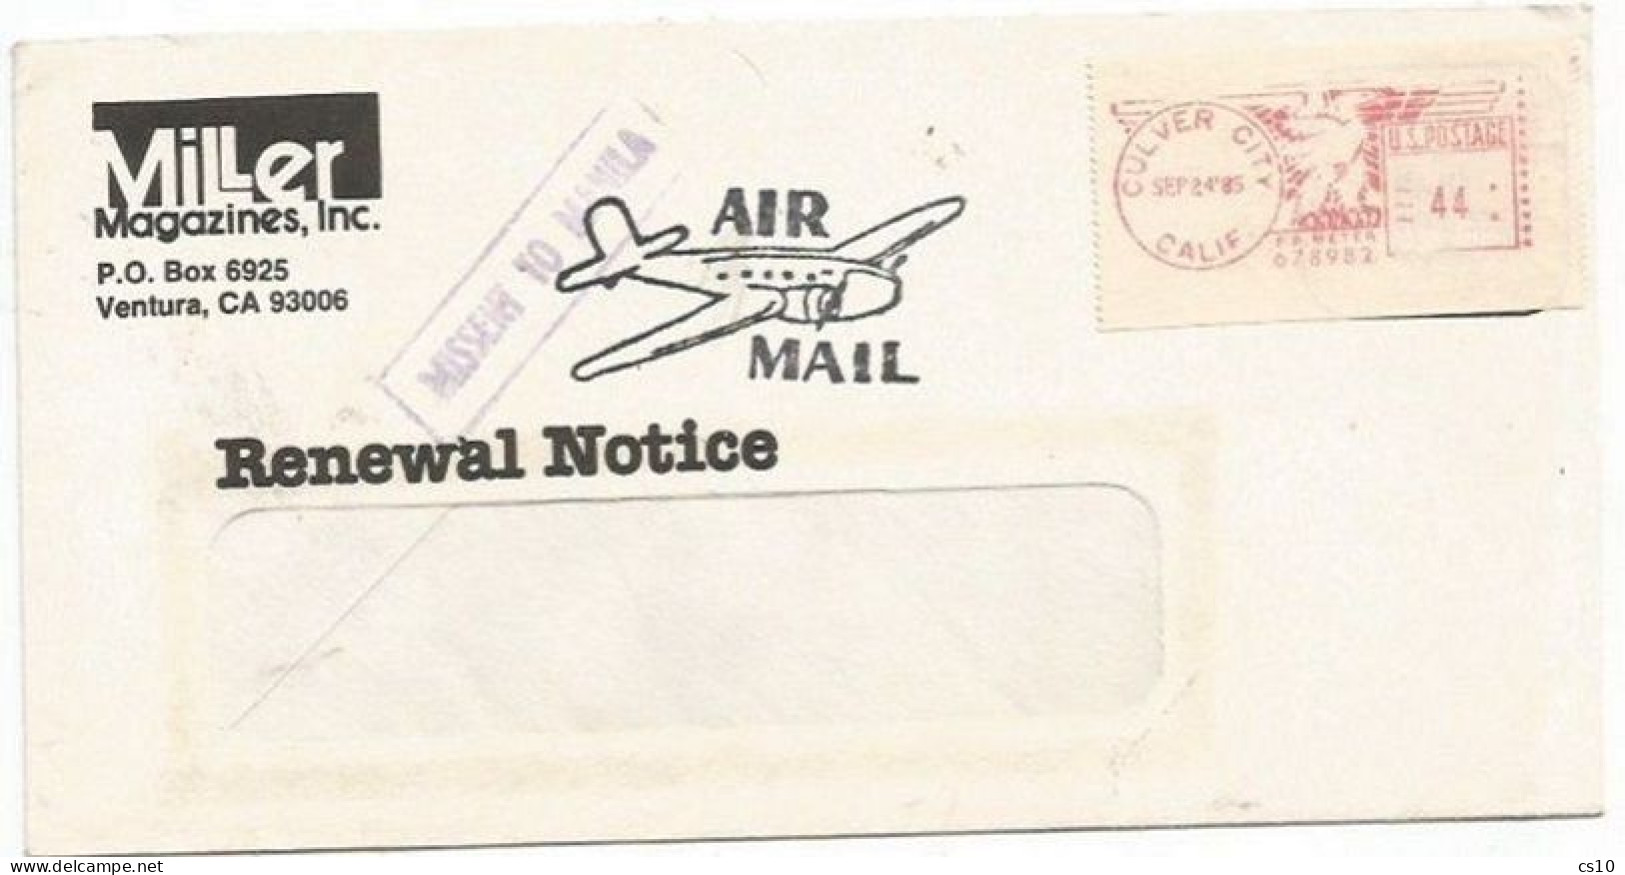 USA 1985 AirmailCV Culver City CA 24sep85 X Italy Milano "MISSENT TO MANILA" Postage Label C.44 - Marcofilie